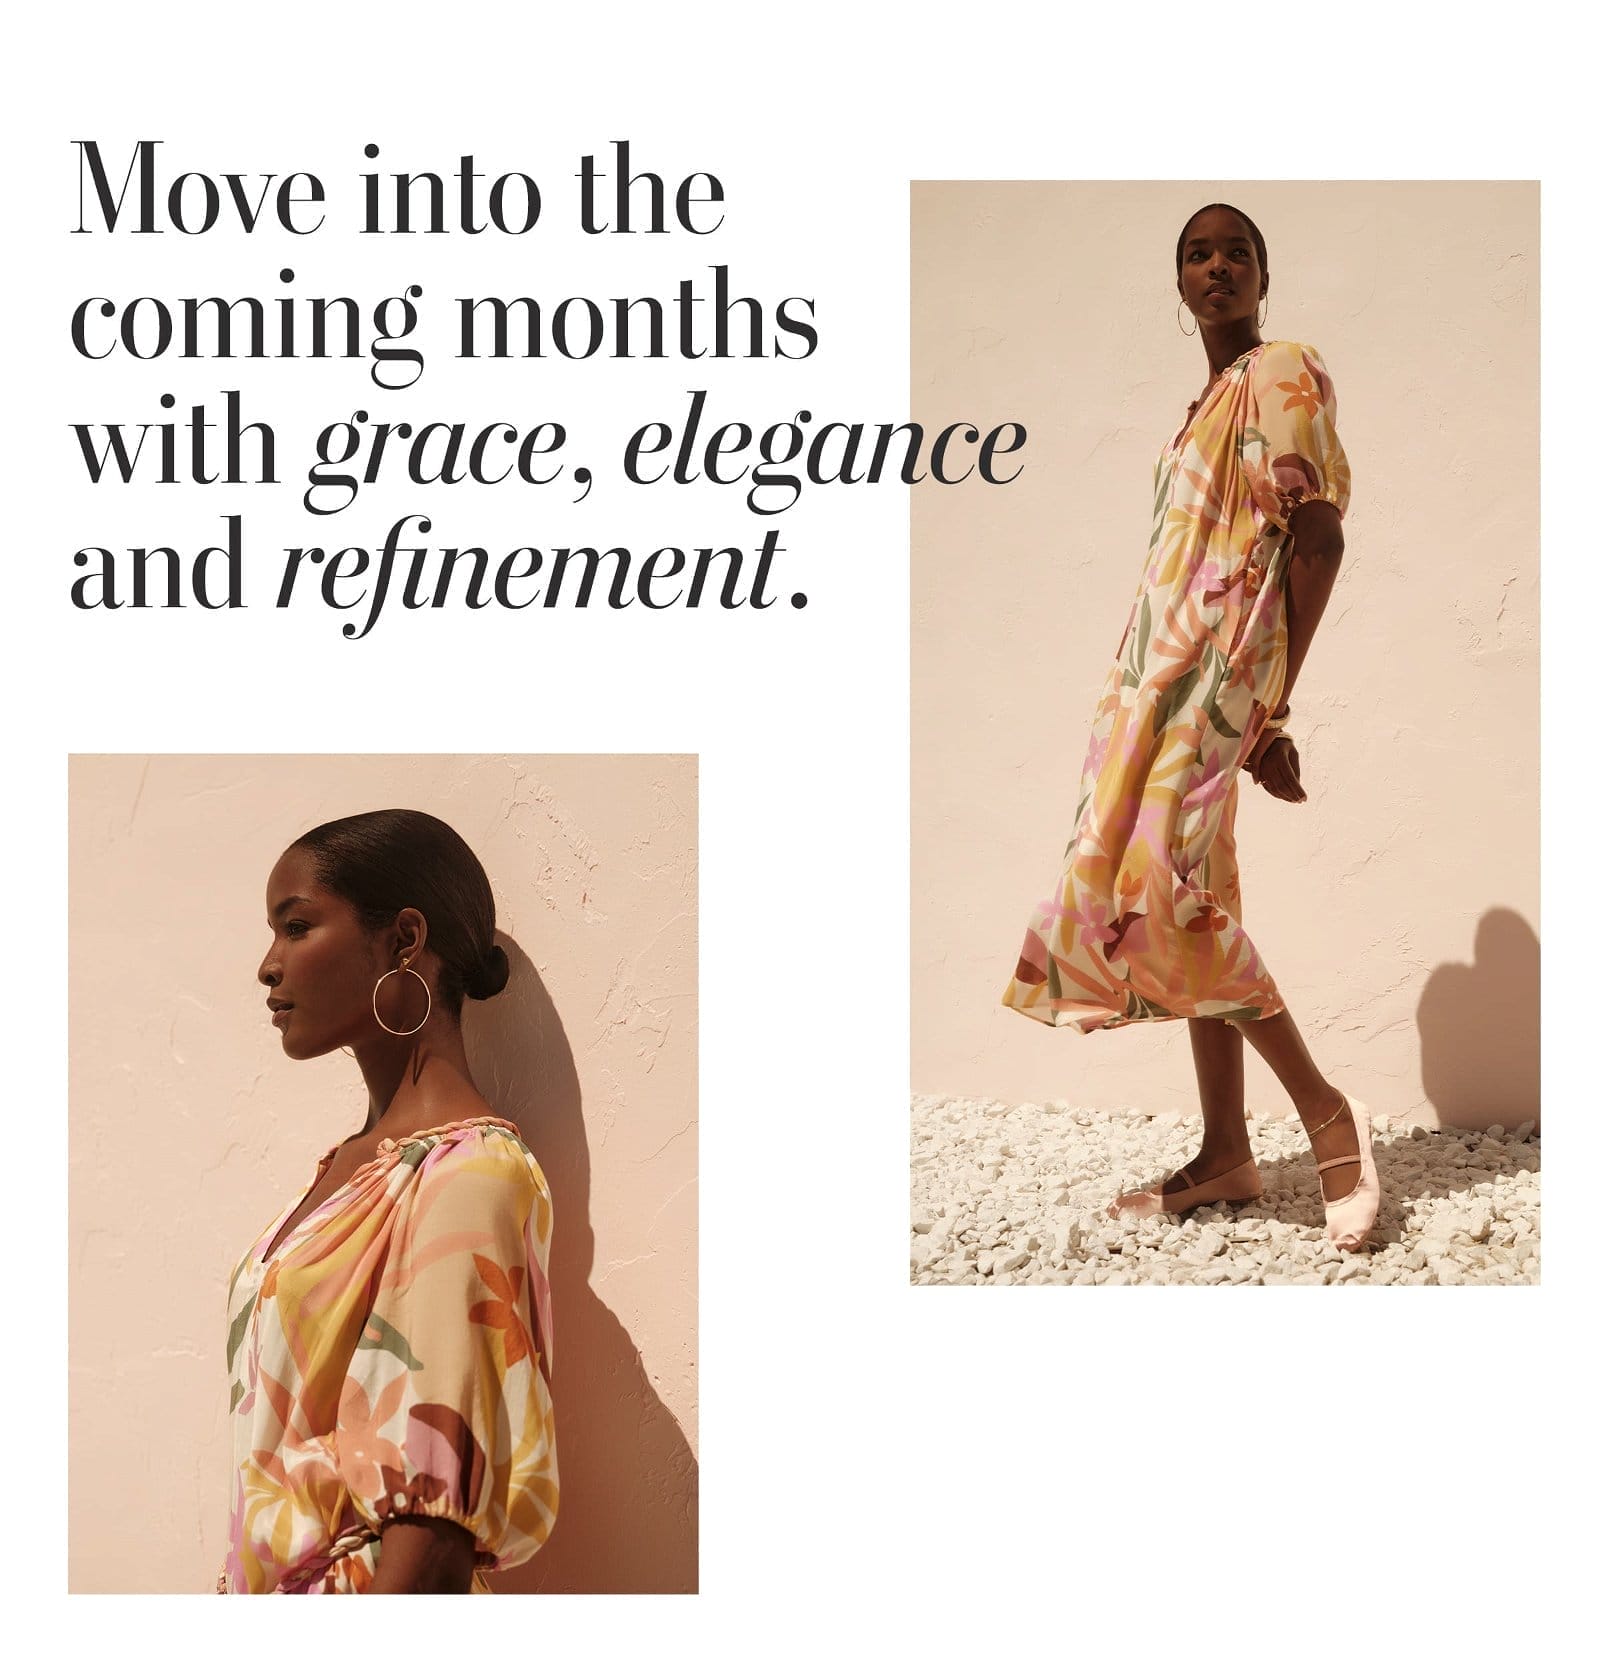 Move into the coming months with grace, elegance, and refinement.